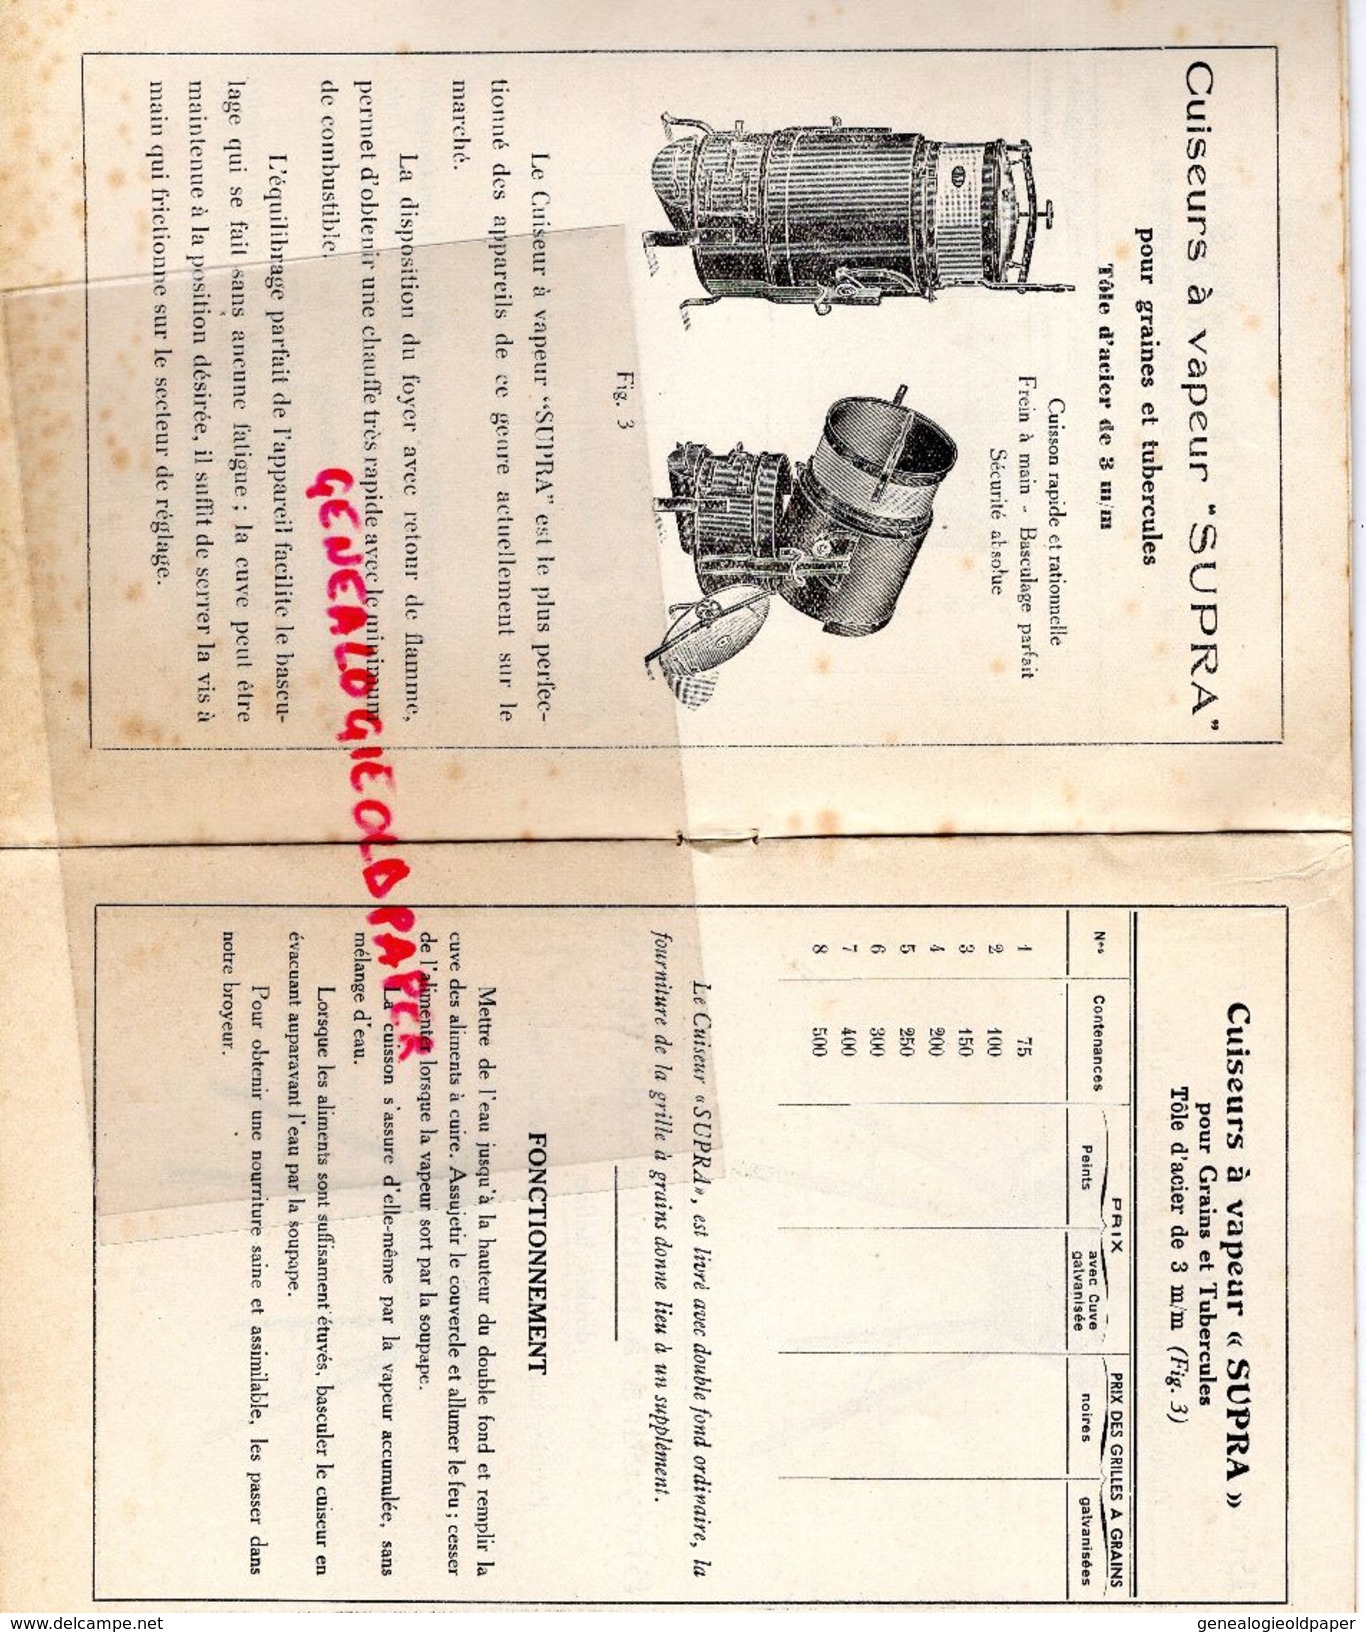 89- VERVIGNY GARE- RARE CATALOGUE CHAUDRONNERIE AGRICOLE INDUSTRIELLE-BOUCHERON SOILLY-SUPRA- 1934 - Old Professions